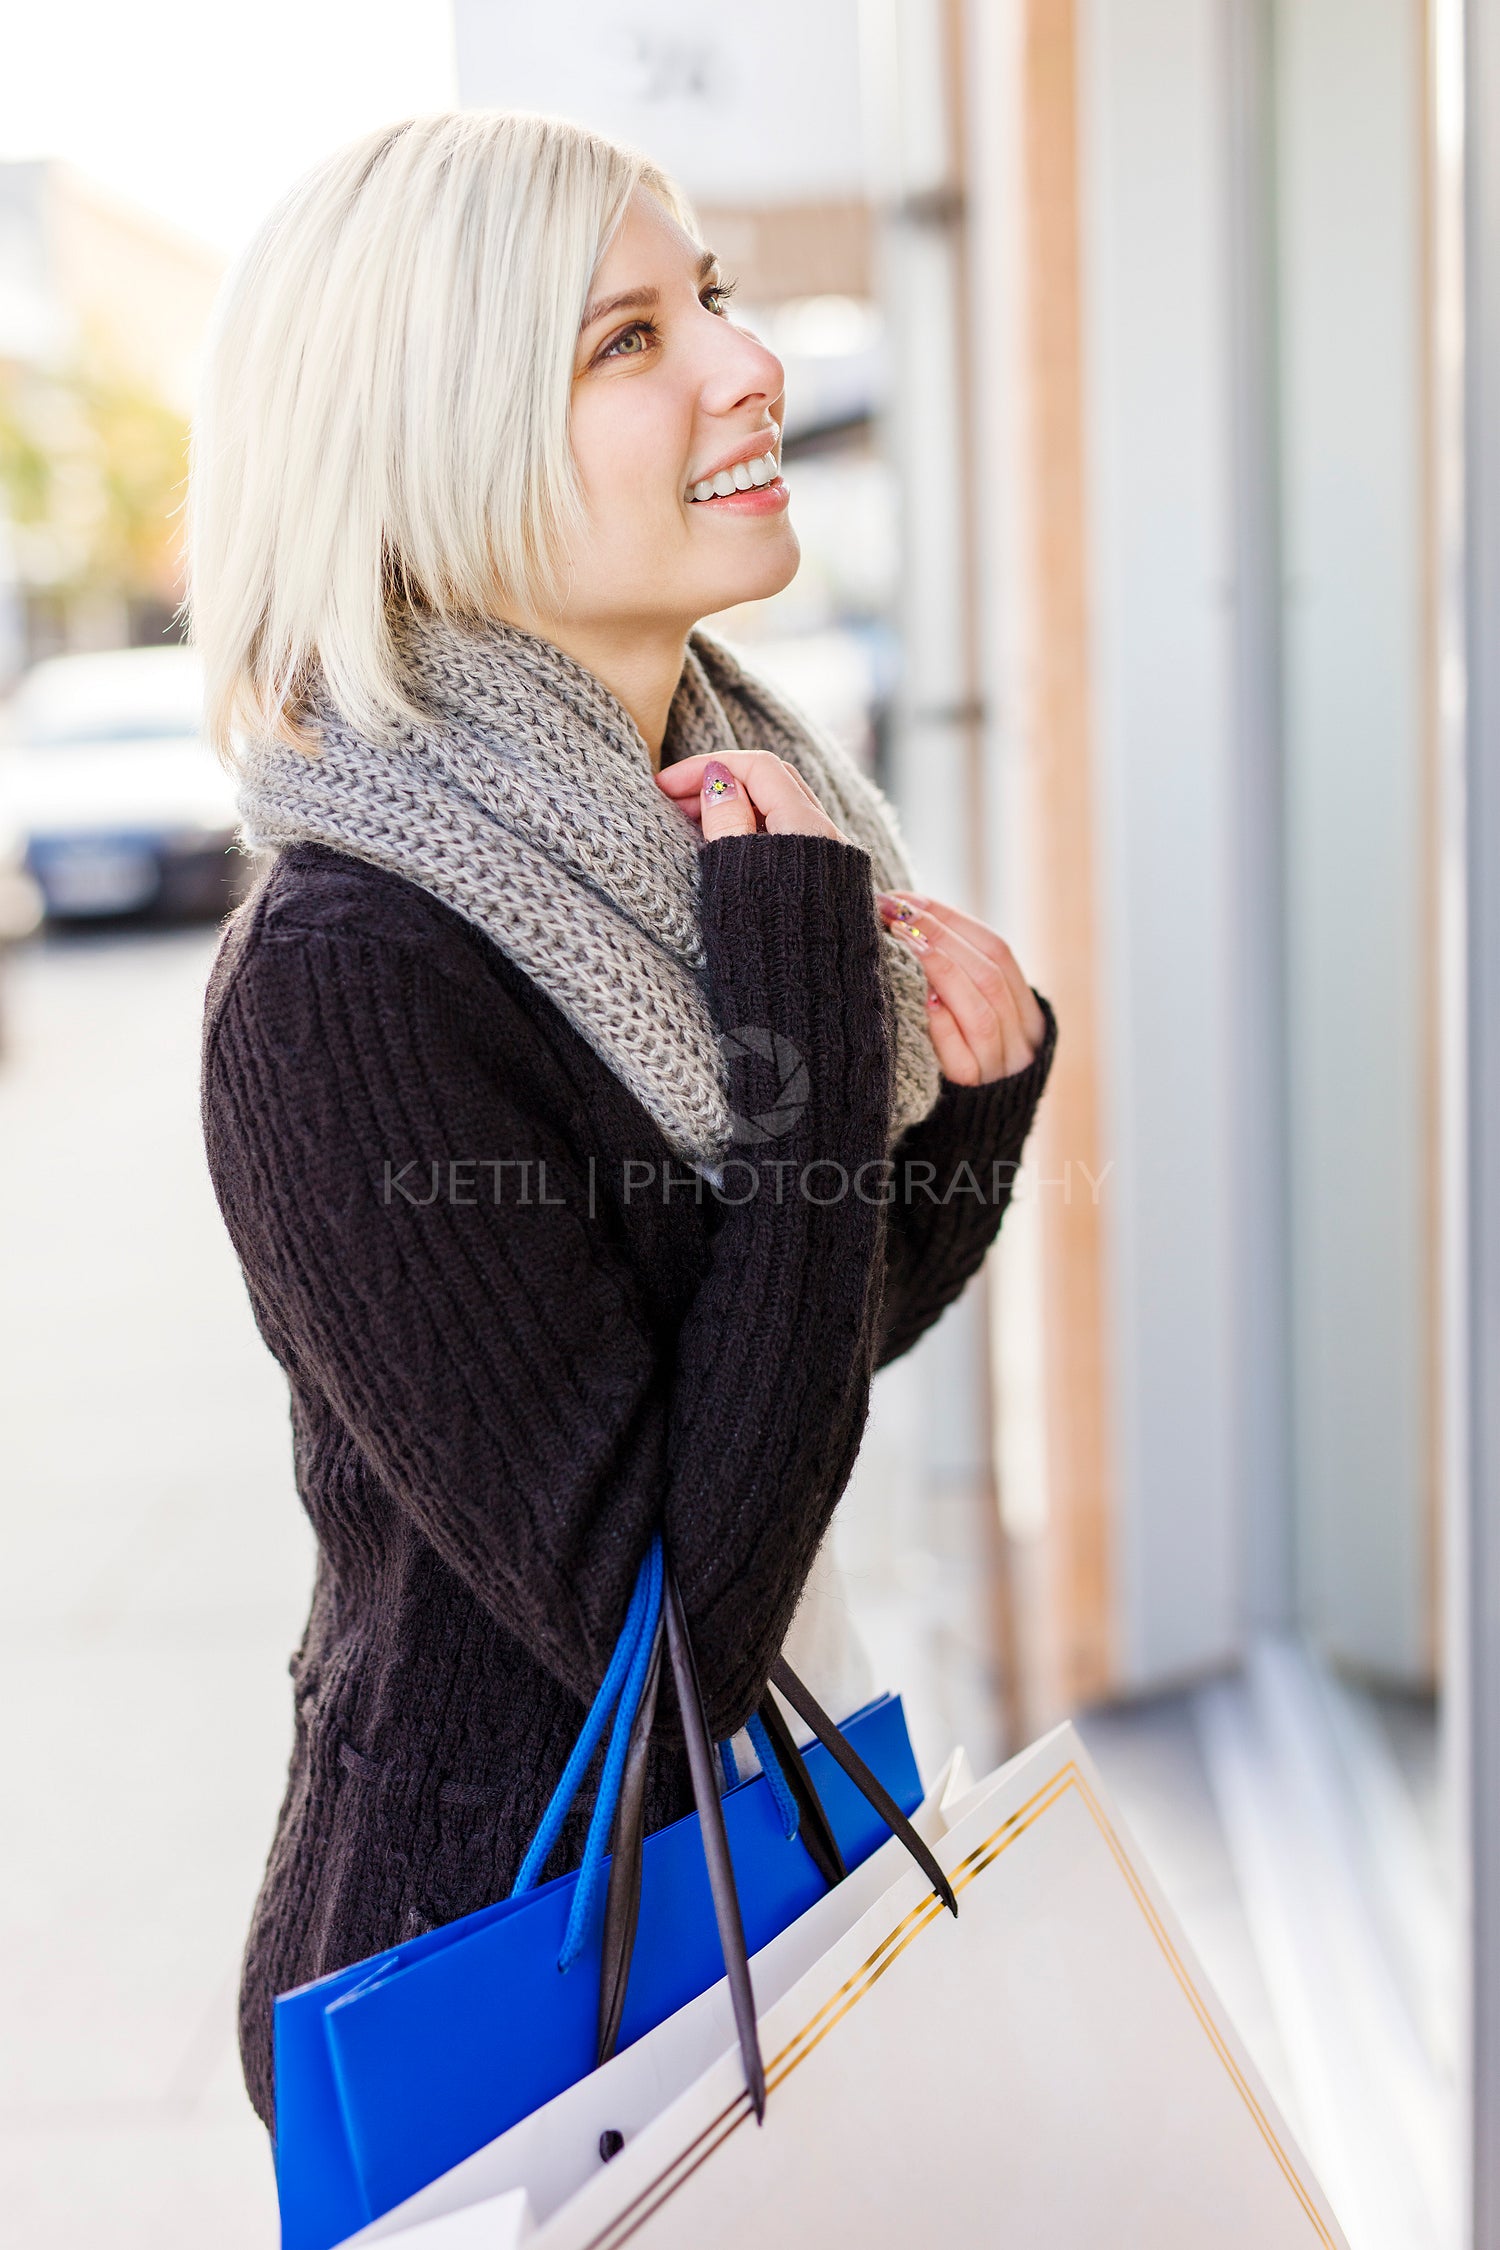 Smiling woman out shopping in the city